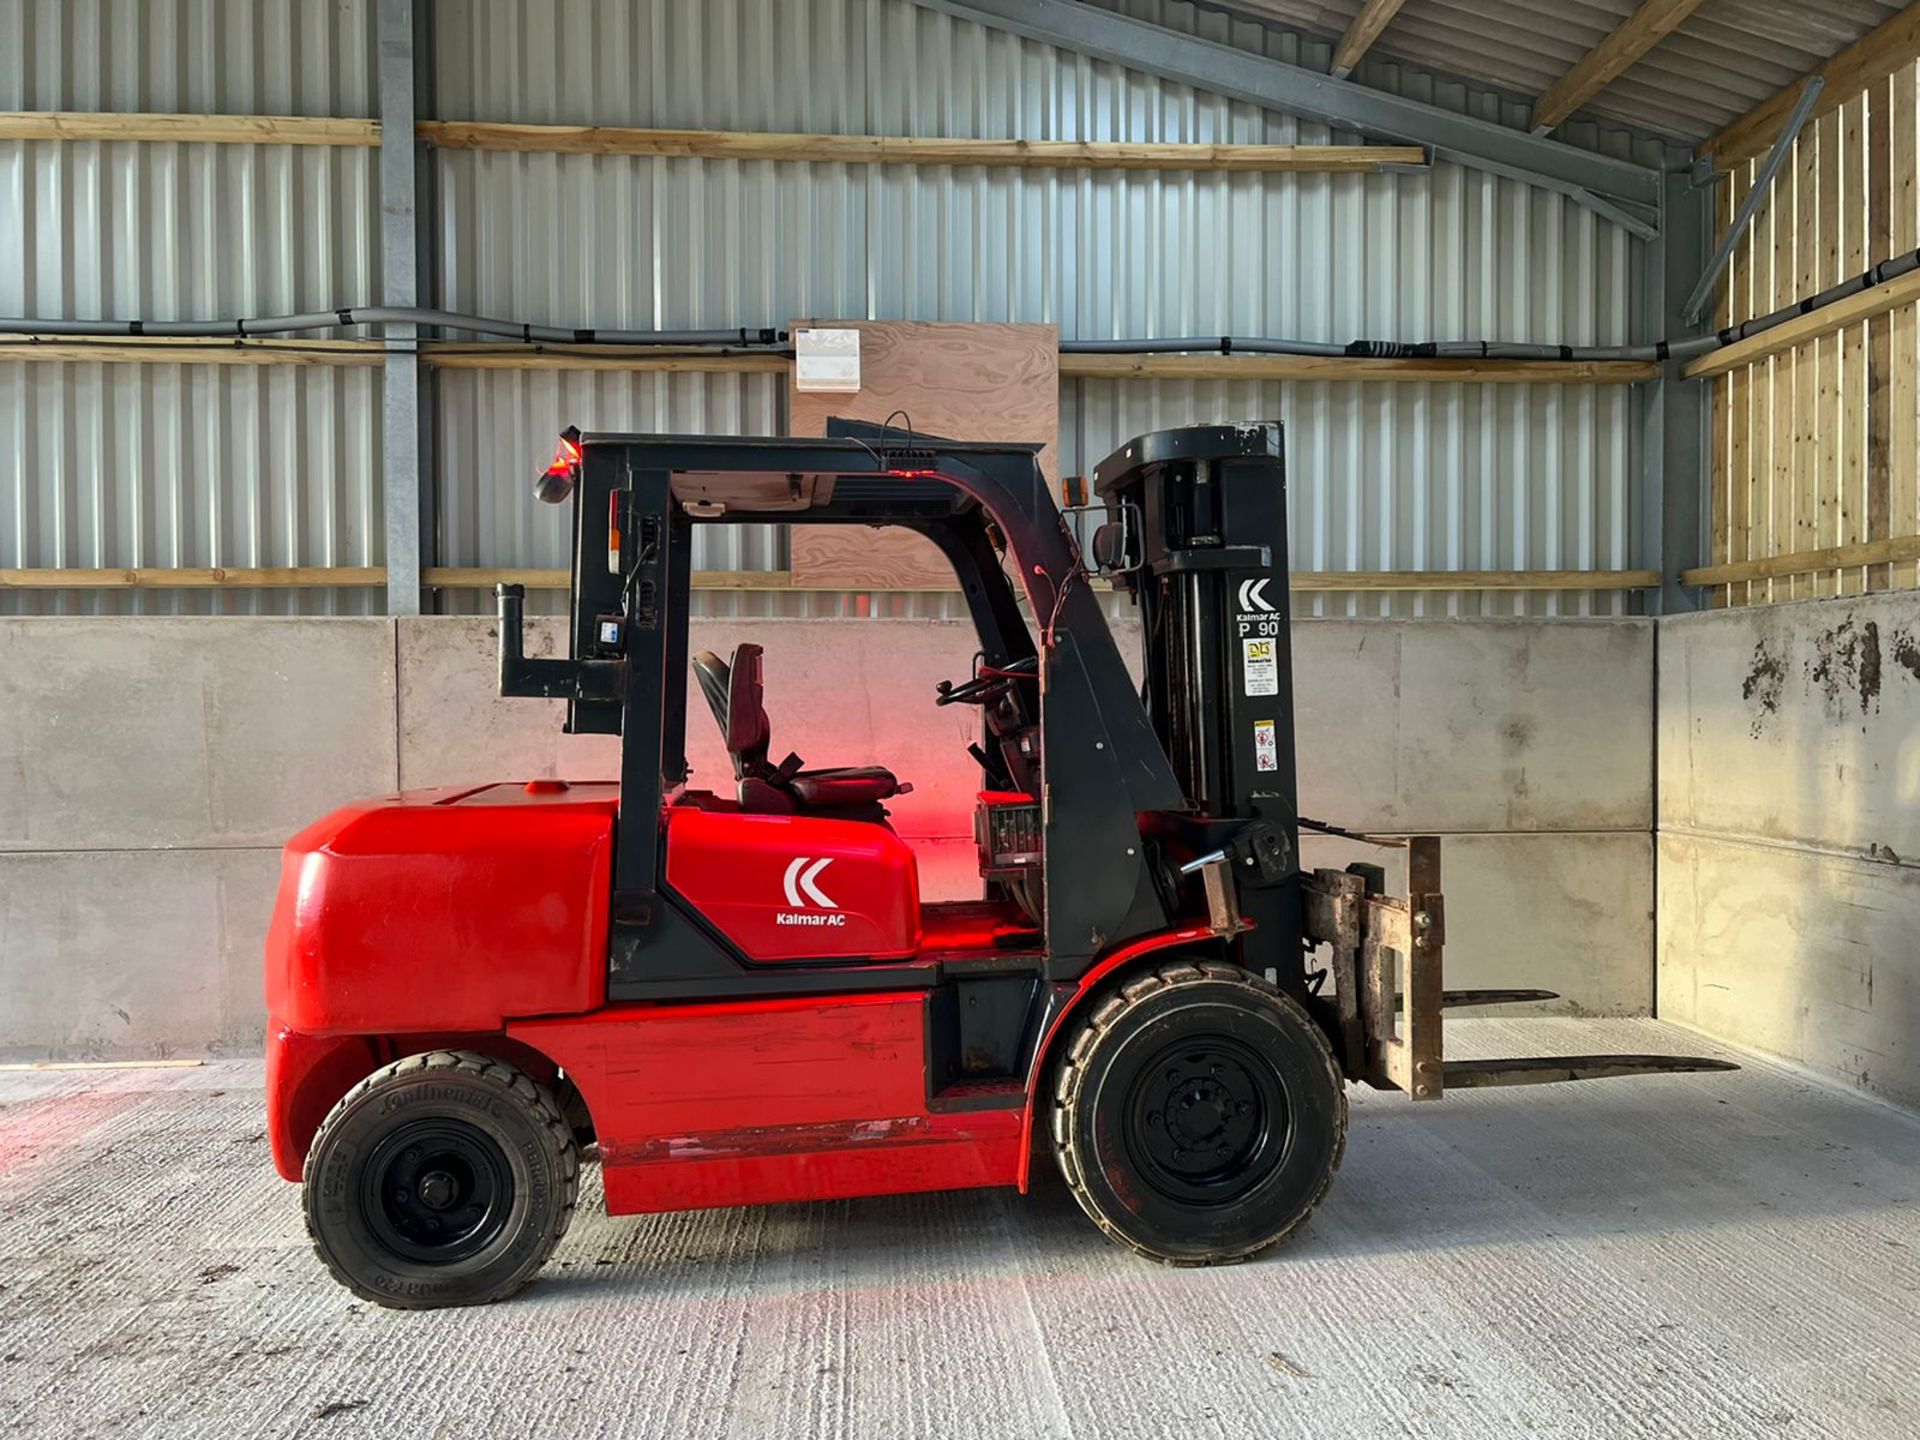 KALMAR P90CX FORK LIFT CONTAINER SPEC, 3 STAGE MAST, SIDE SHIFT, RUNS WORKS AND LIFTS *PLUS VAT* - Image 2 of 6